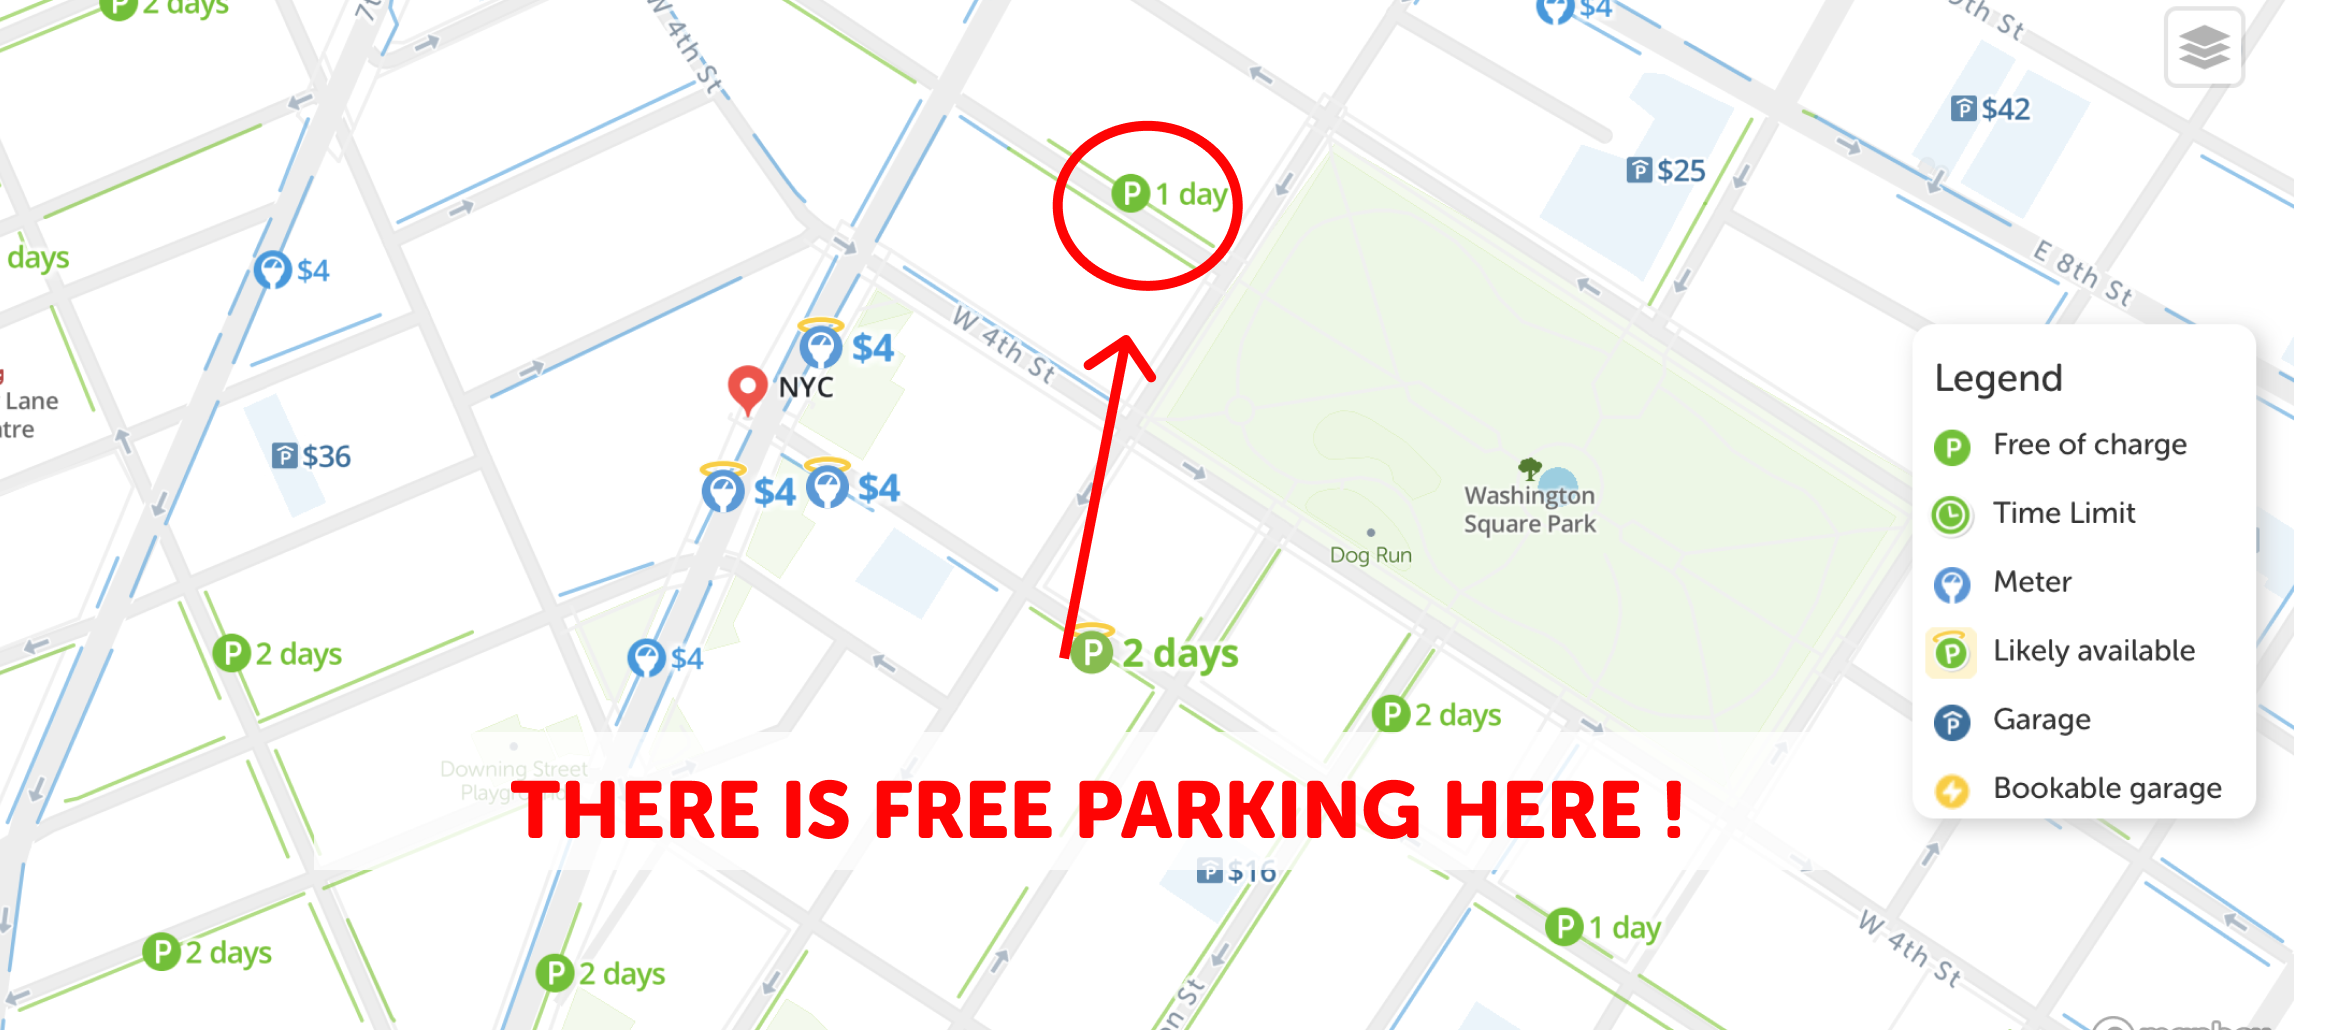 map of free parking in New York City - SpotAngels